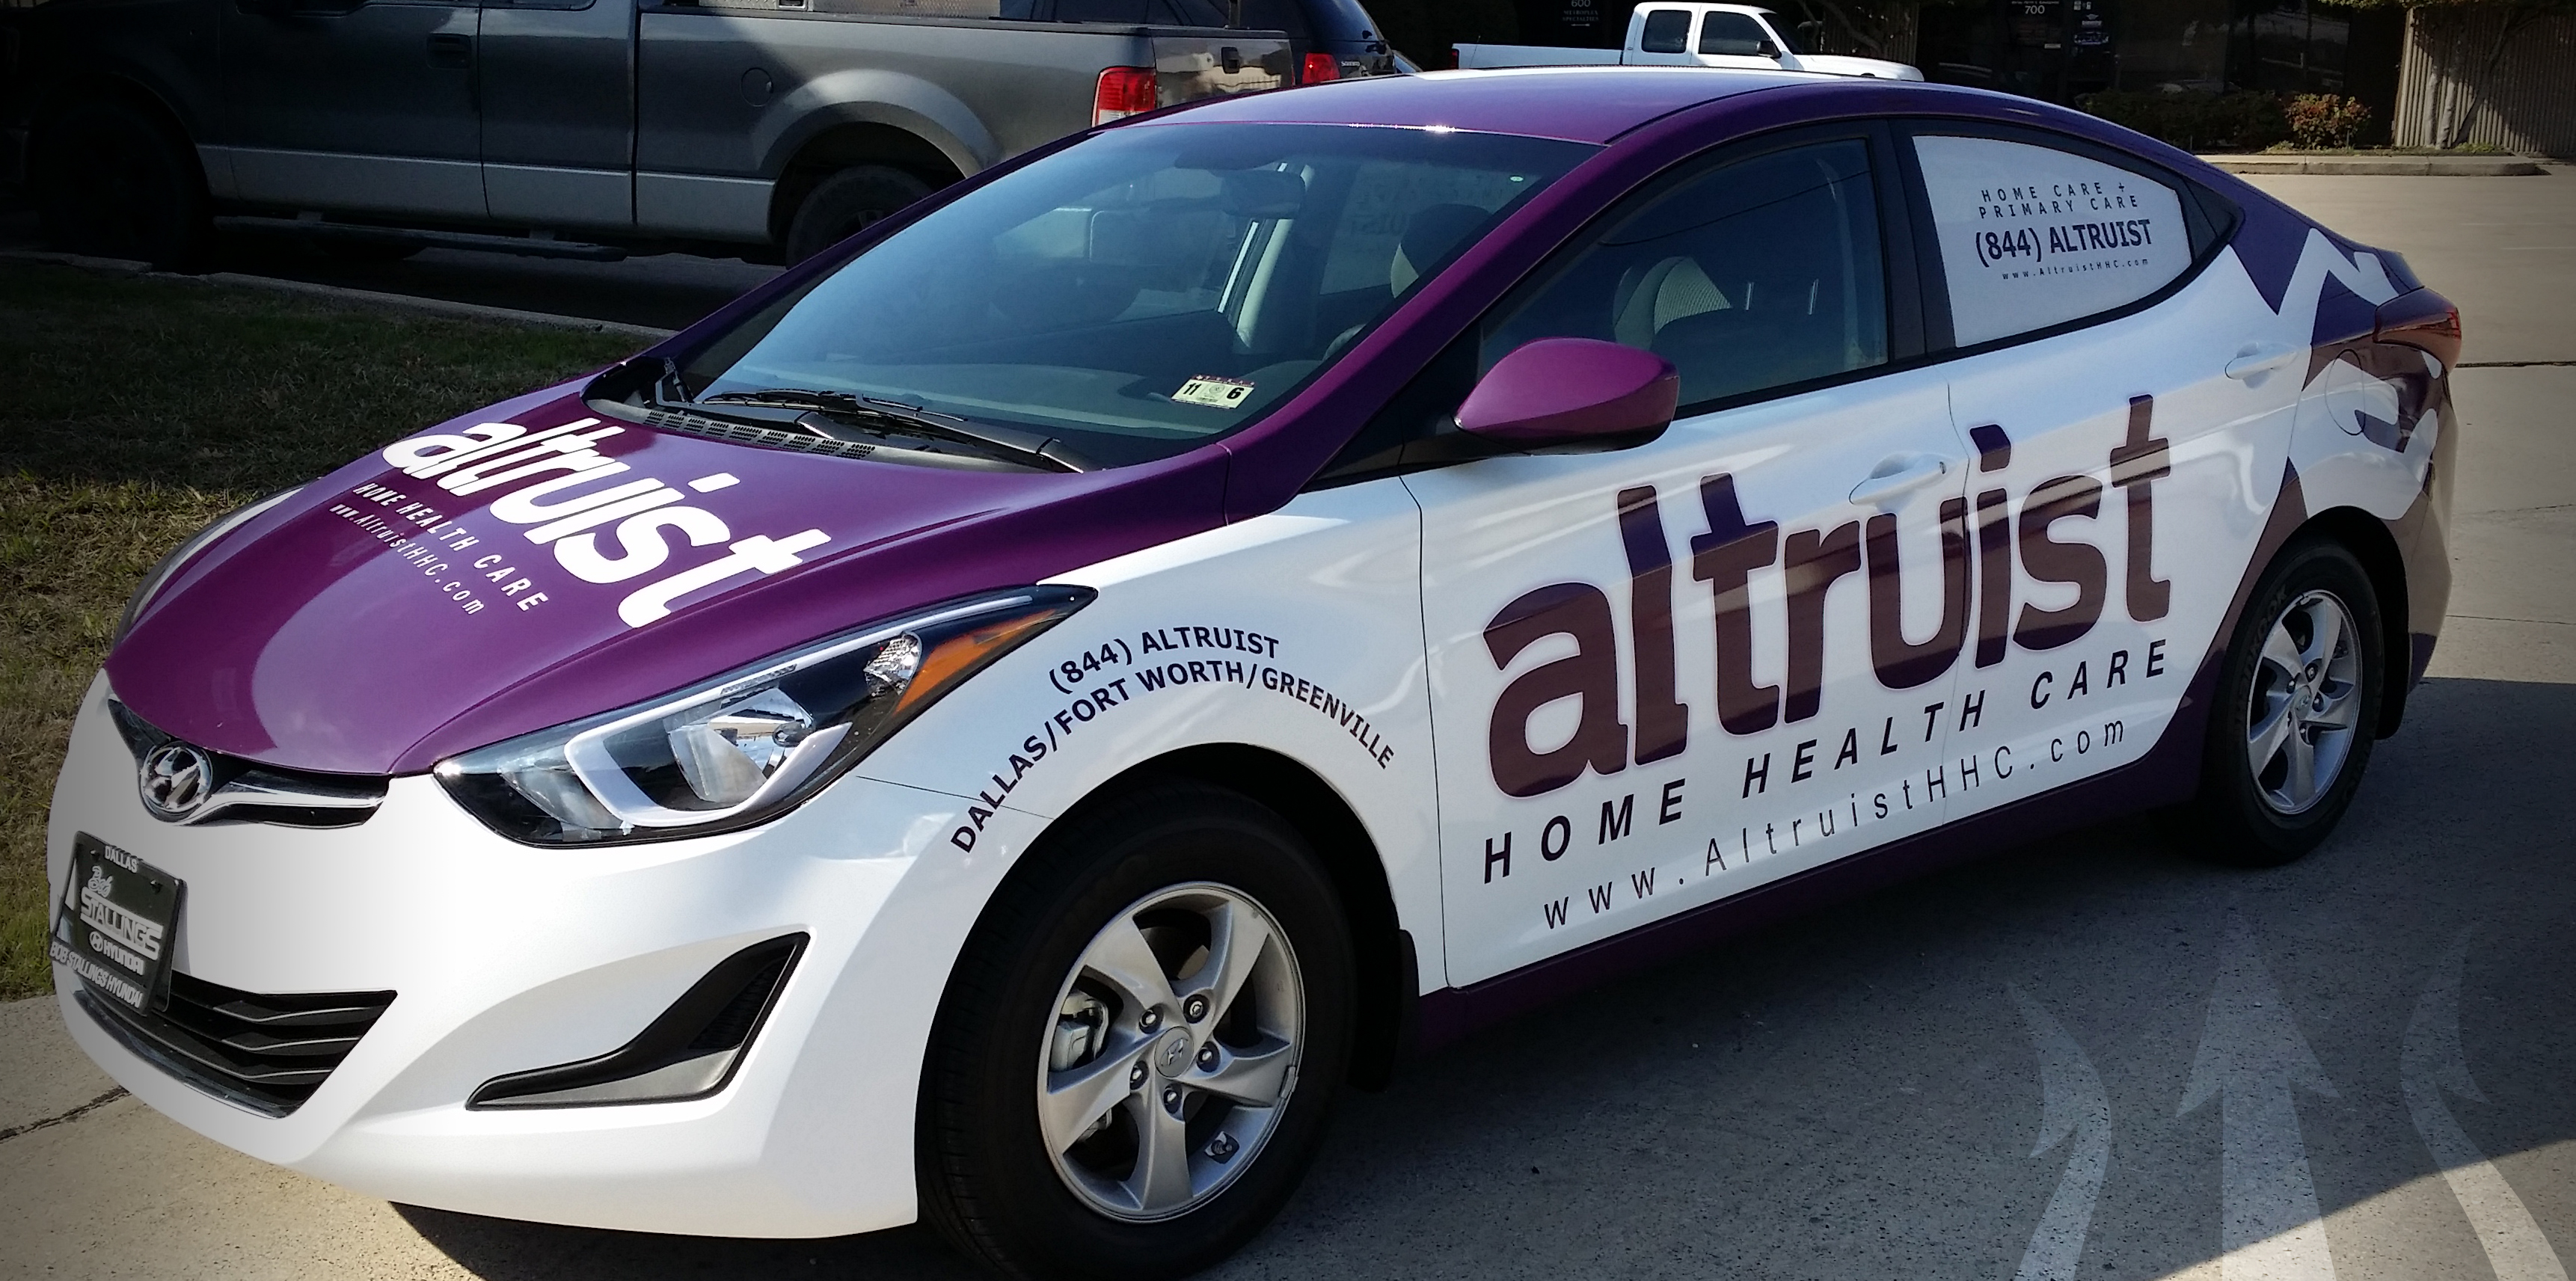 Altrust Vehicle Wraps in Dallas, TX, DFW, Carrollton, TX, Lewisville, TX, and Nearby Cities